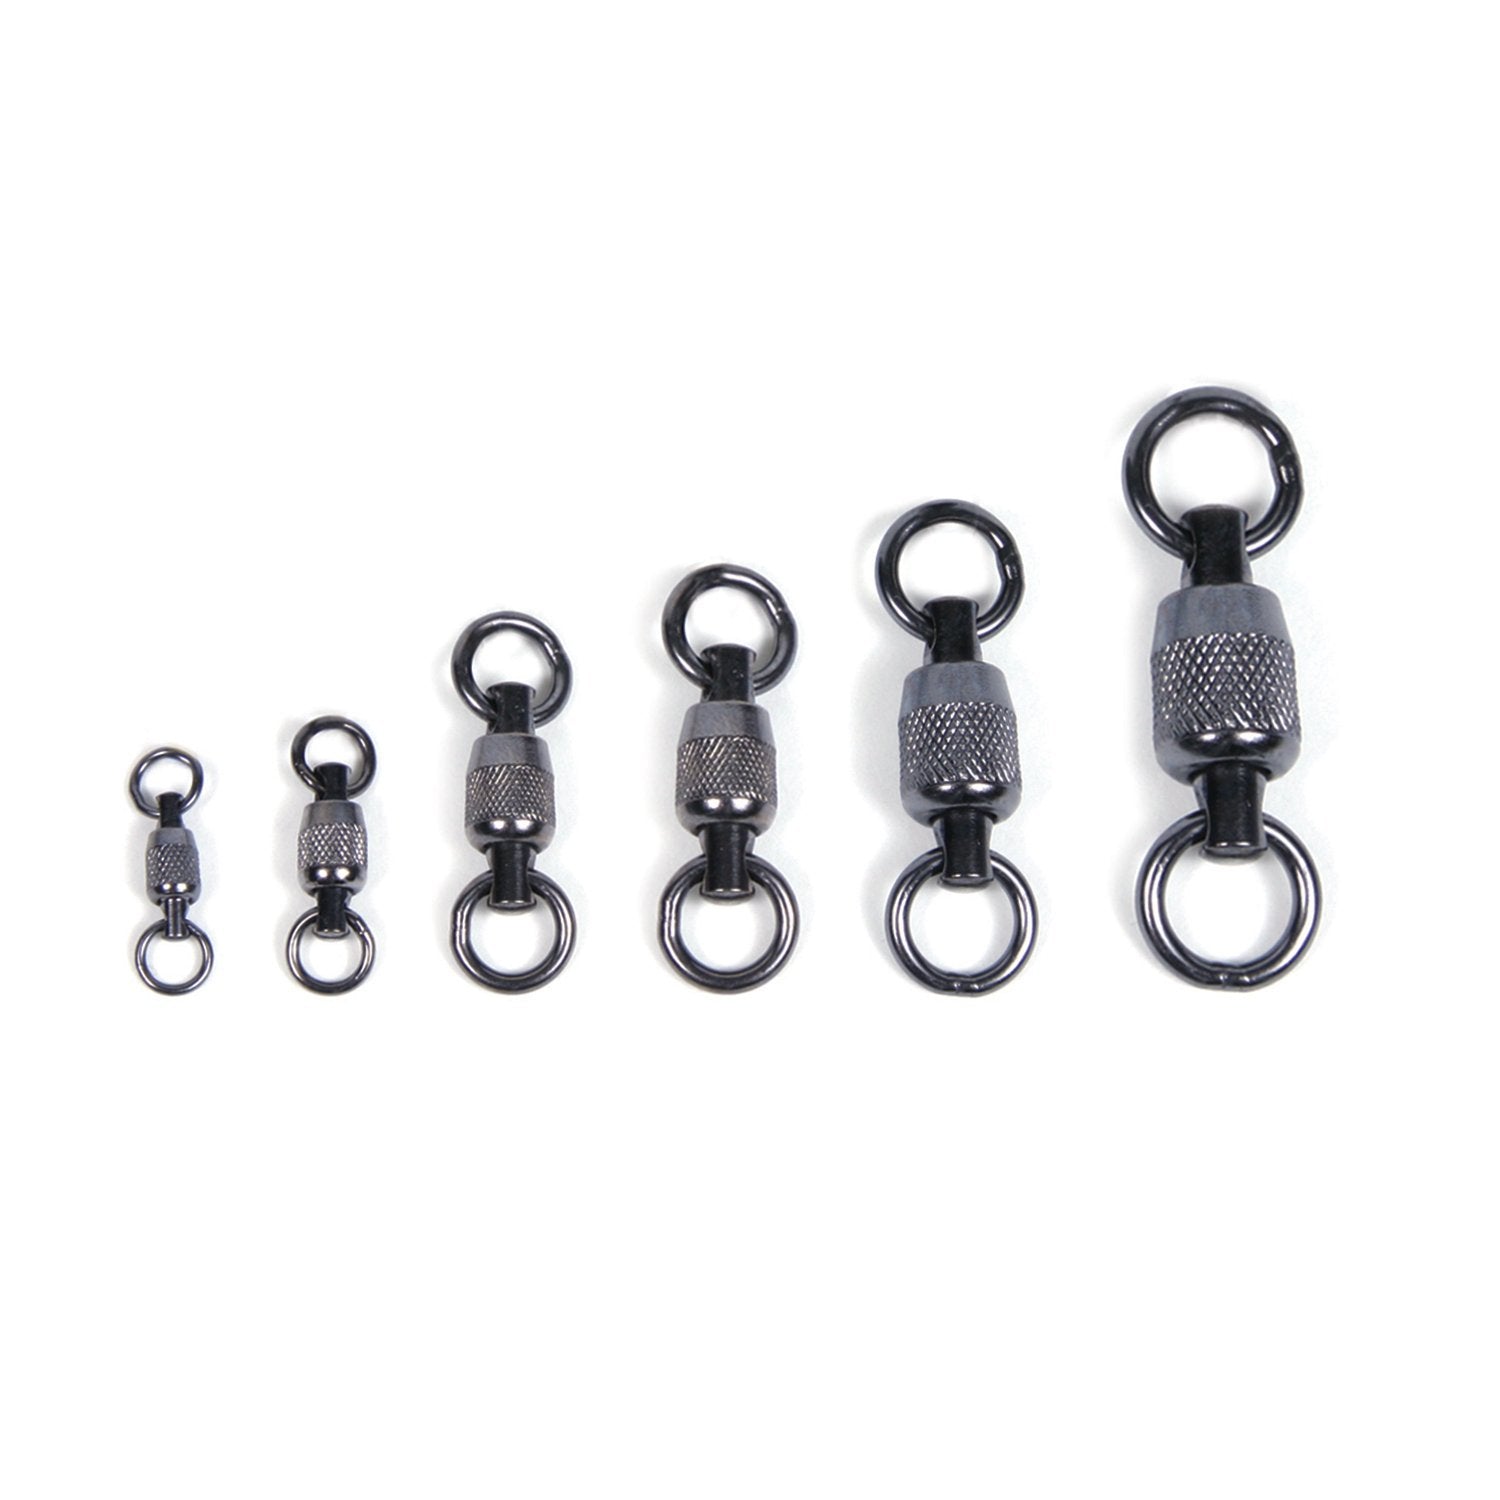 Stainless Steel Dual Rotation Ball Bearing Swivels 10 Pack